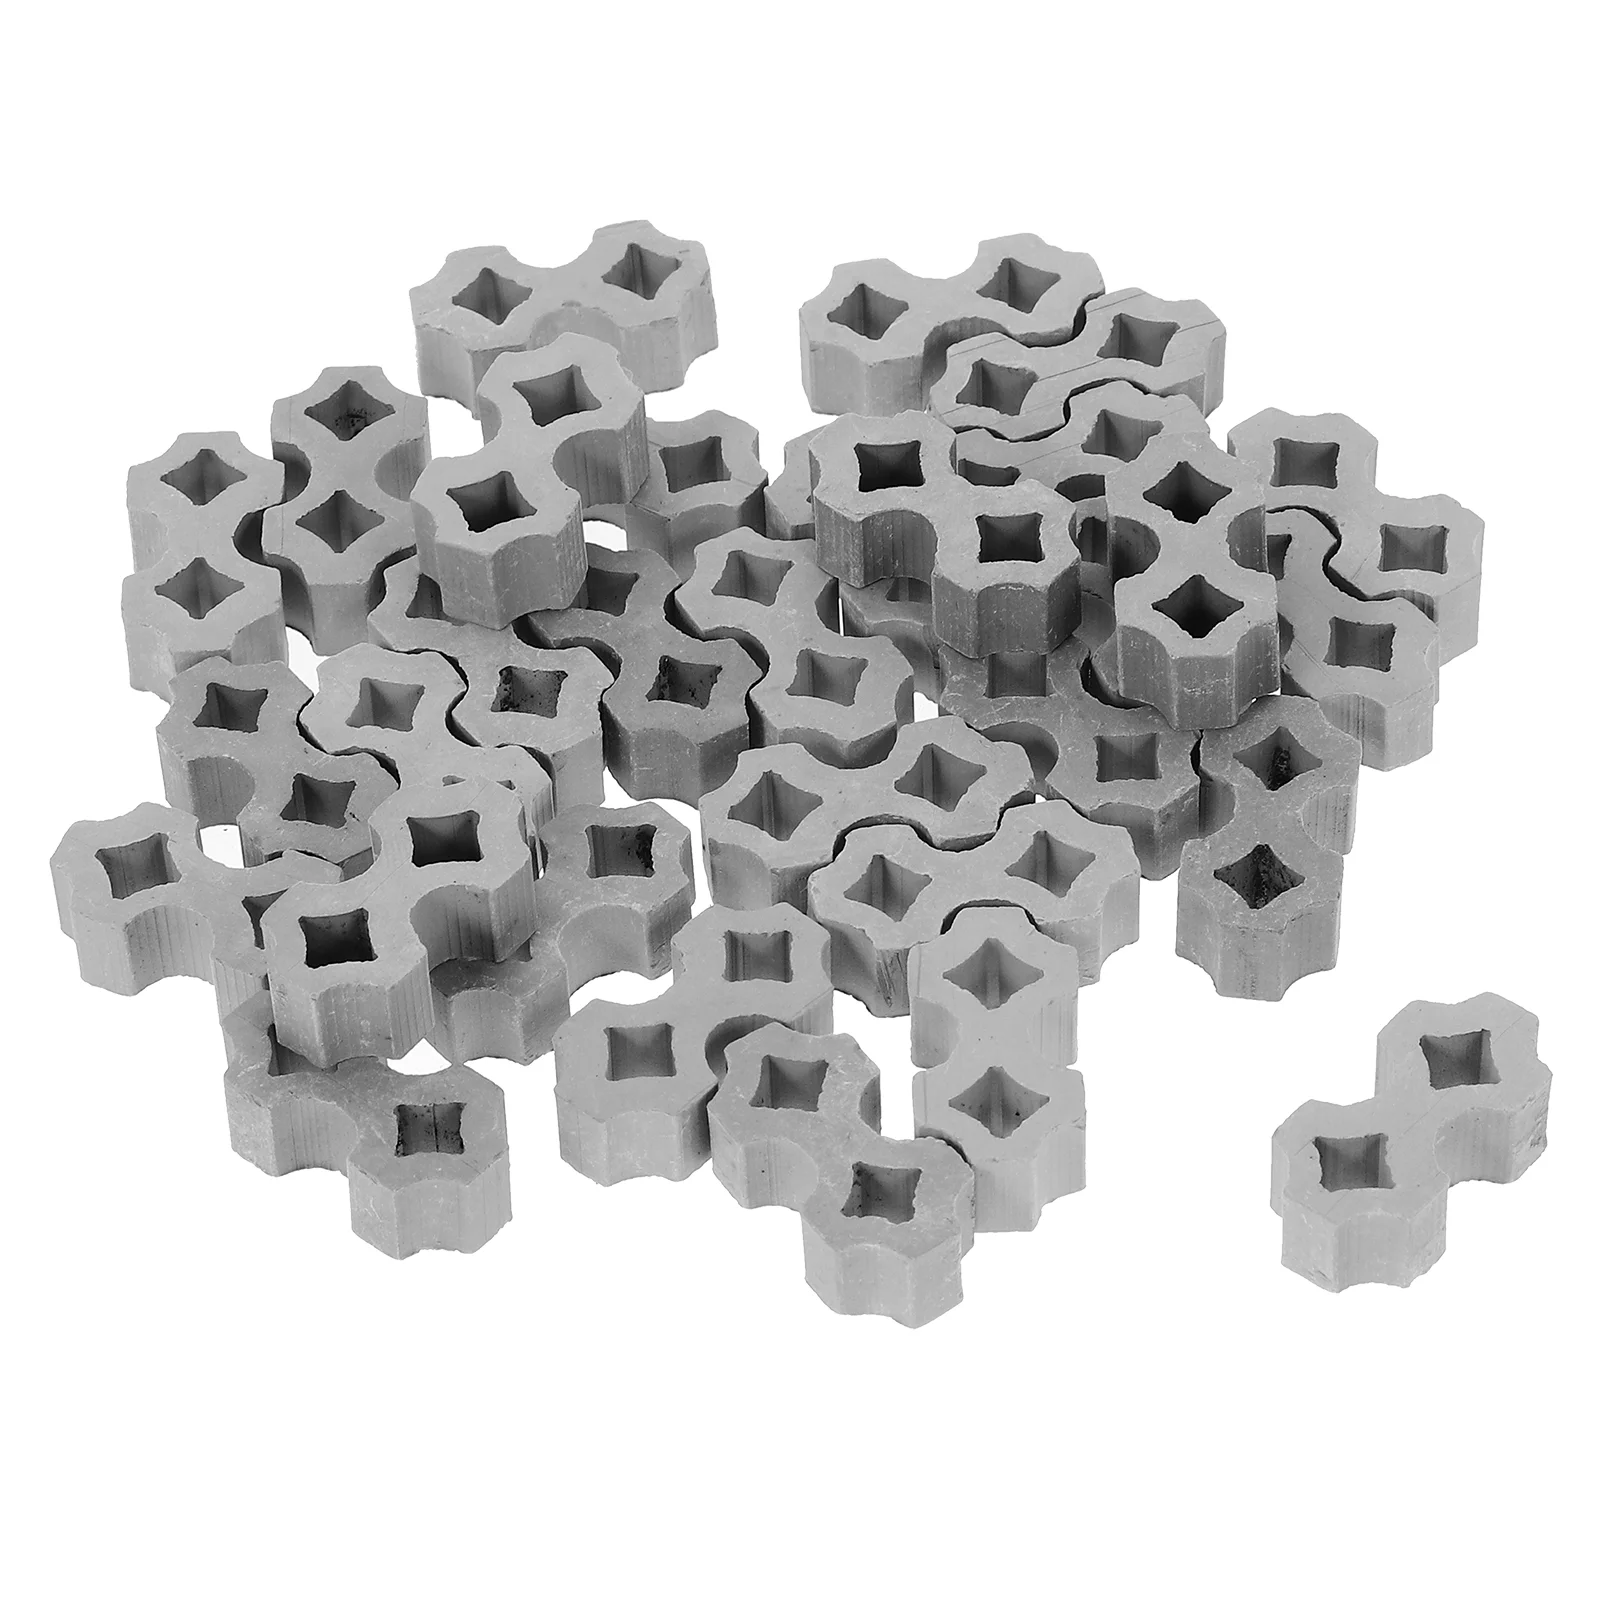 

30 Pcs Toys Fake Wall Bricks Mini Playing House Props Crafts Landscape Accessories Sand Table Decors Miniature Figurines Child